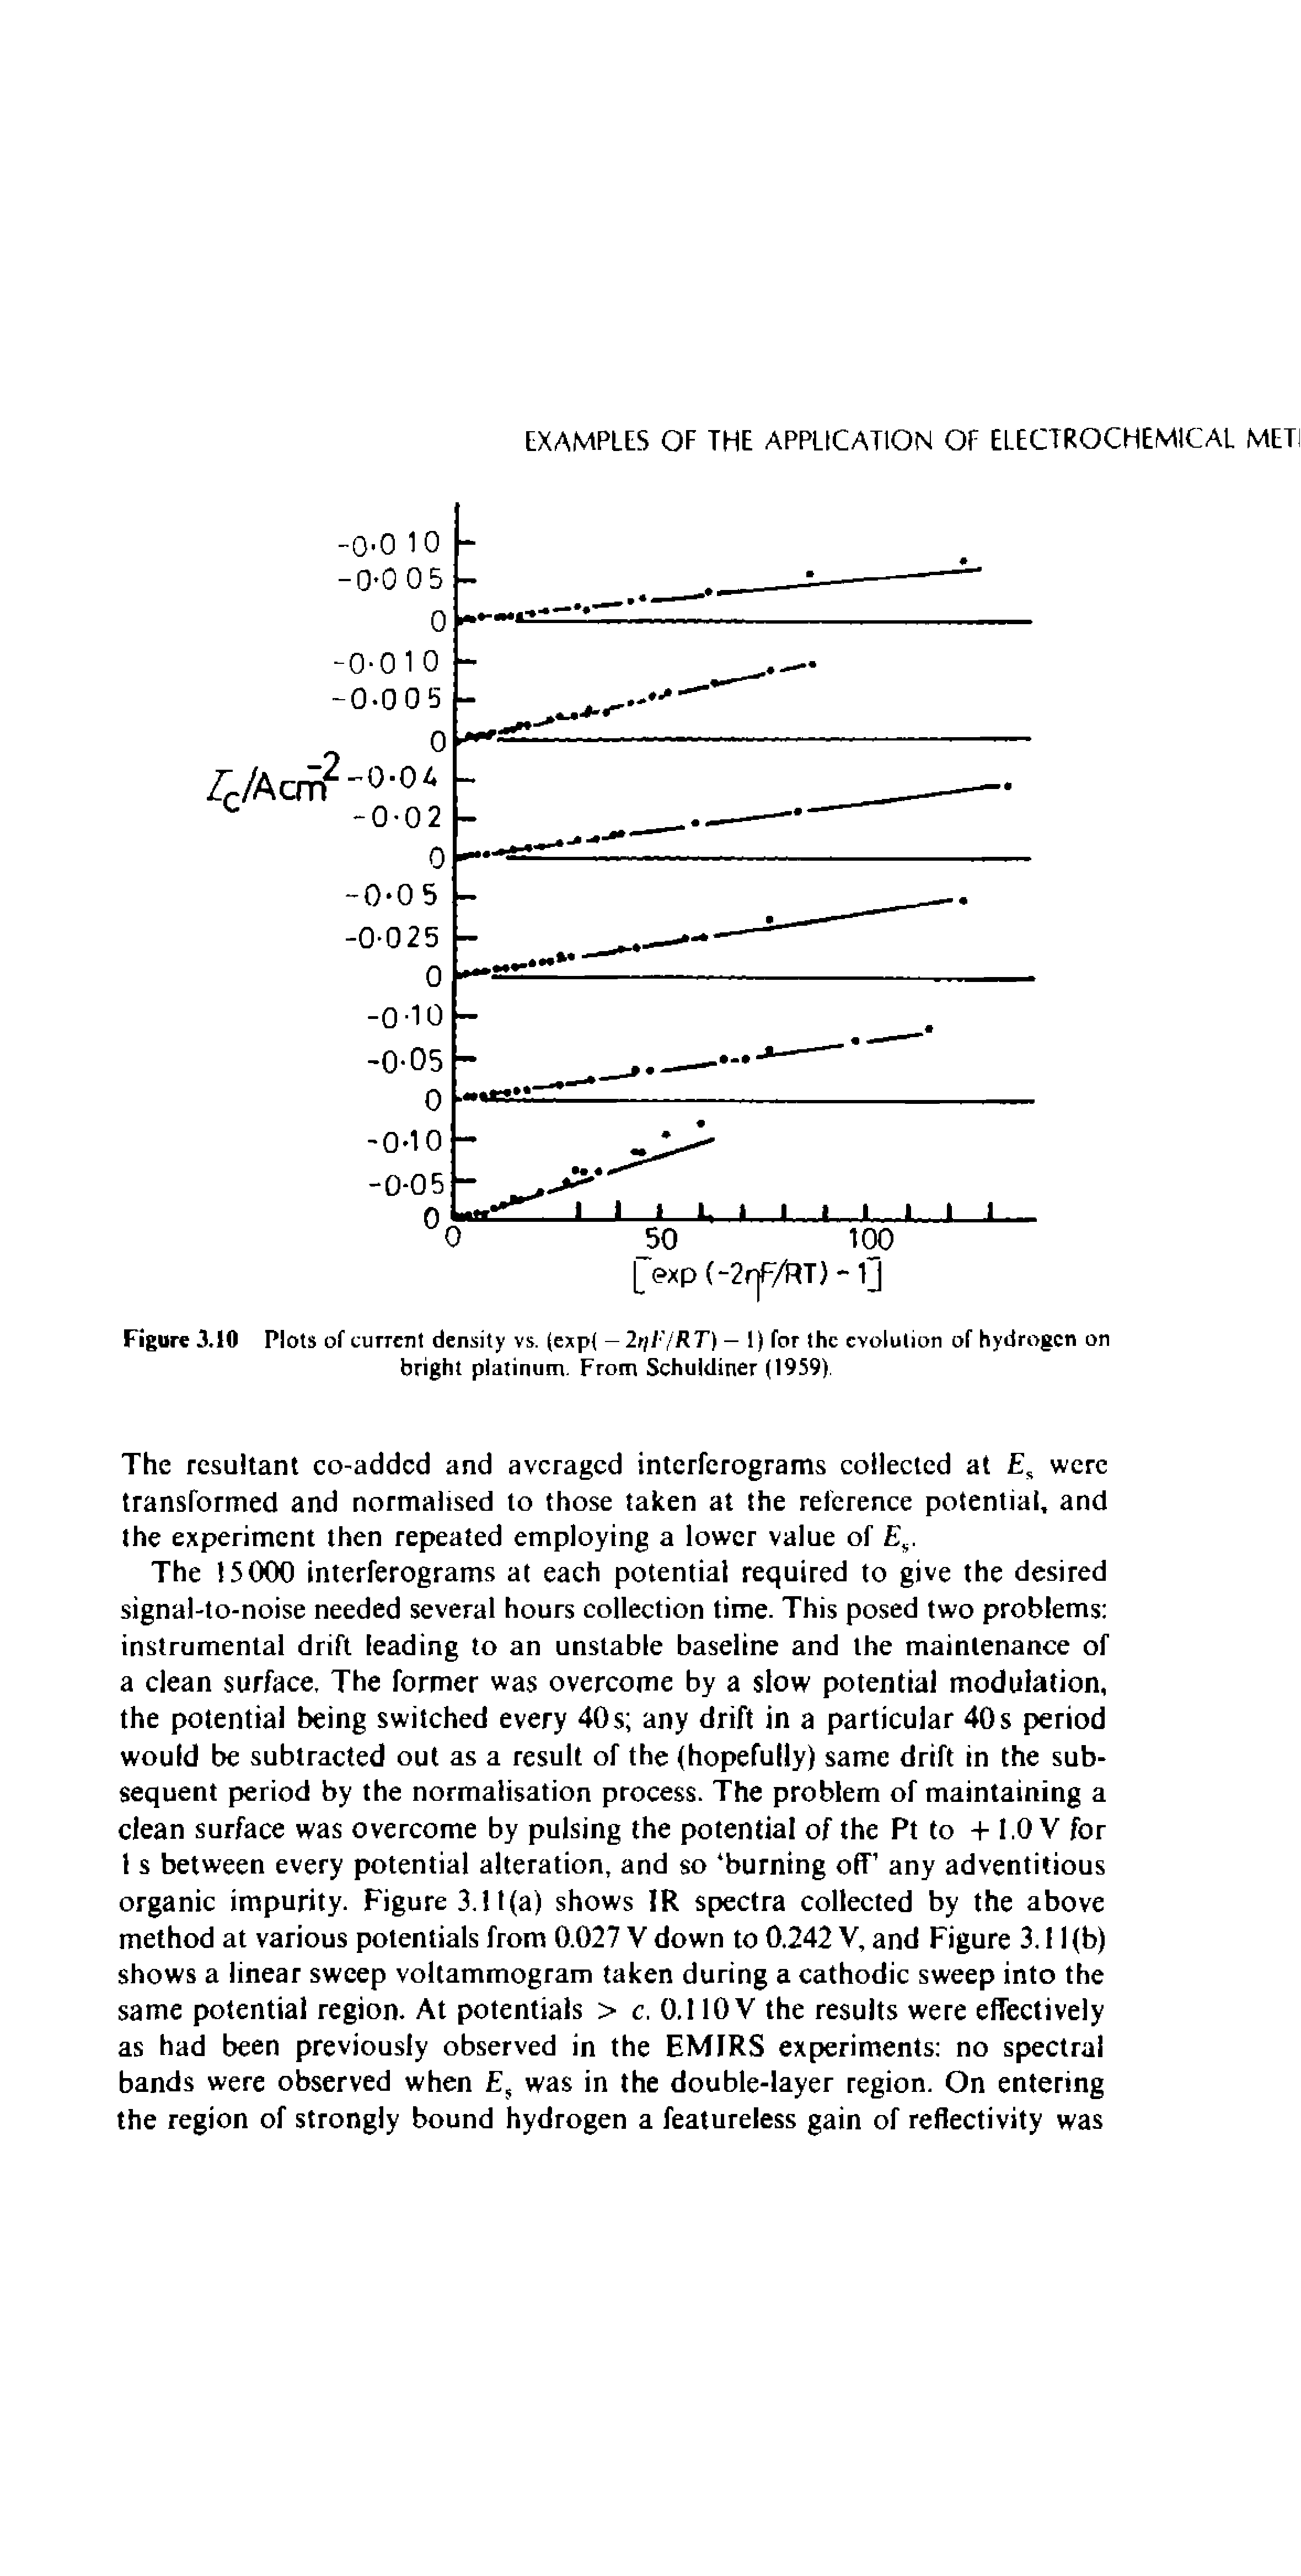 Figure 3.10 Plots of current density vs. (exp( — 2t F/RT) — 1) for the evolution of hydrogen on bright platinum. From Schuldiner (1959)...